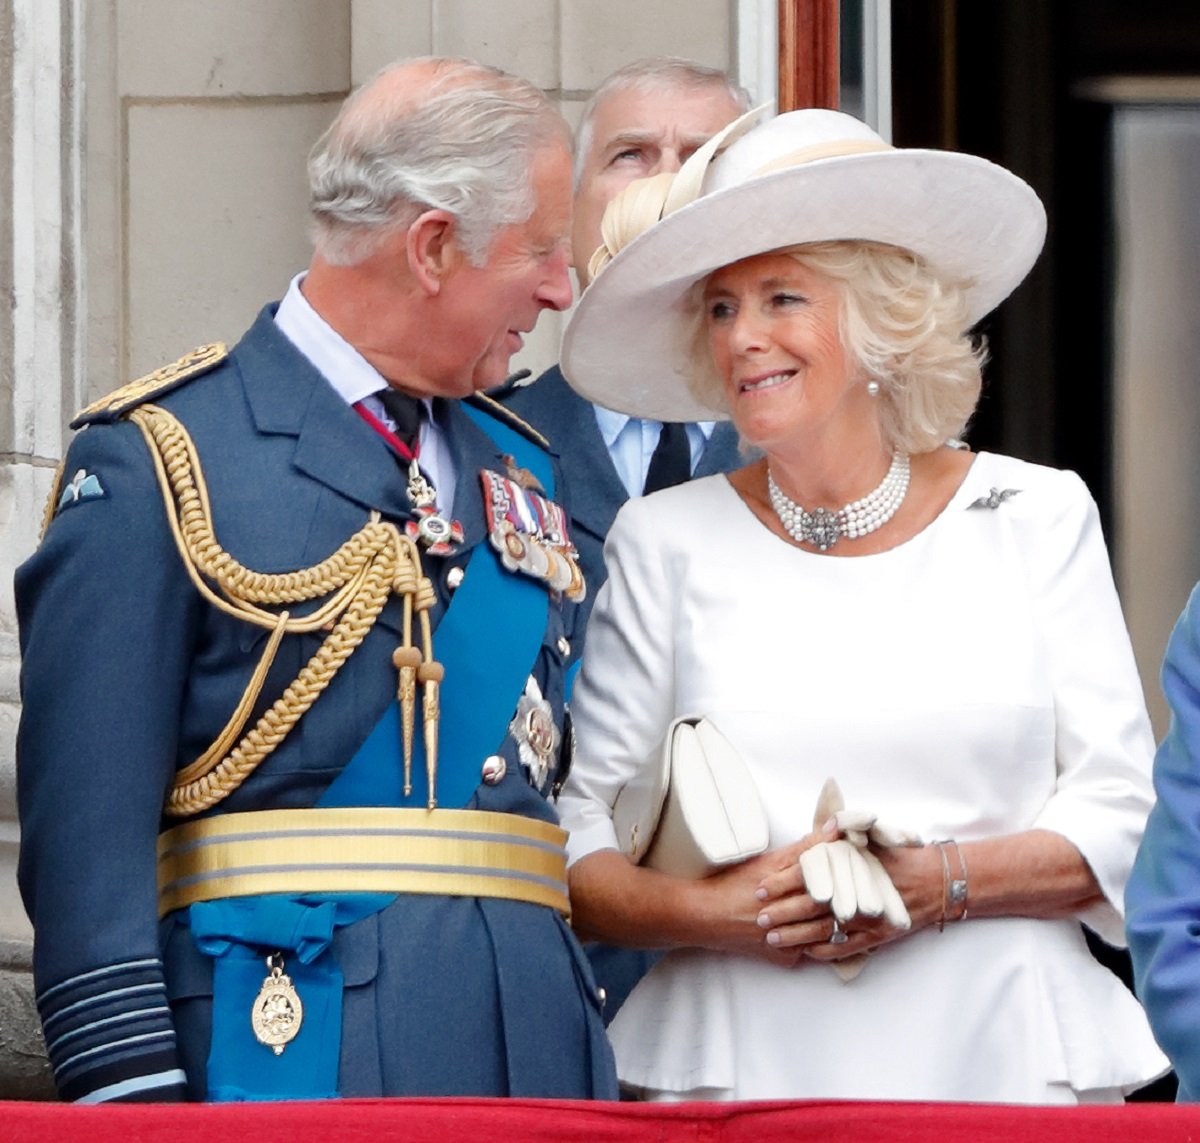 Now-King Charles III and Camilla Parker Bowles (now-Queen Camilla) standing on the balcony of Buckingham Palace prior to a flypast